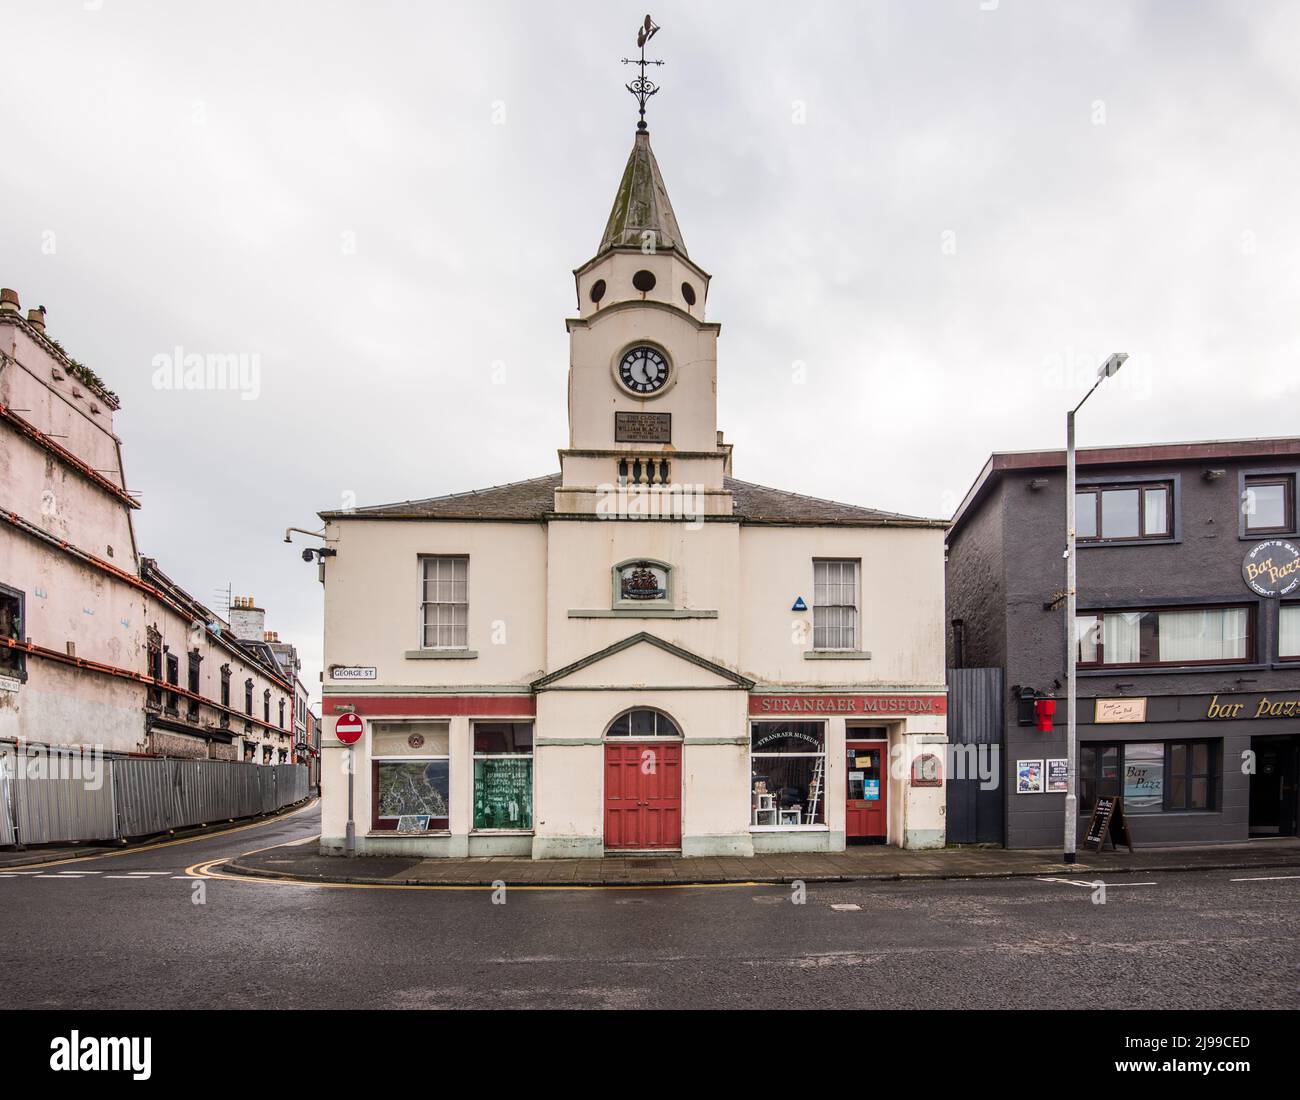 The Old Town Hall, completed in 1777 (now occupied by the Stranraer Museum),in Dumfries & Galloway, Stock Photo